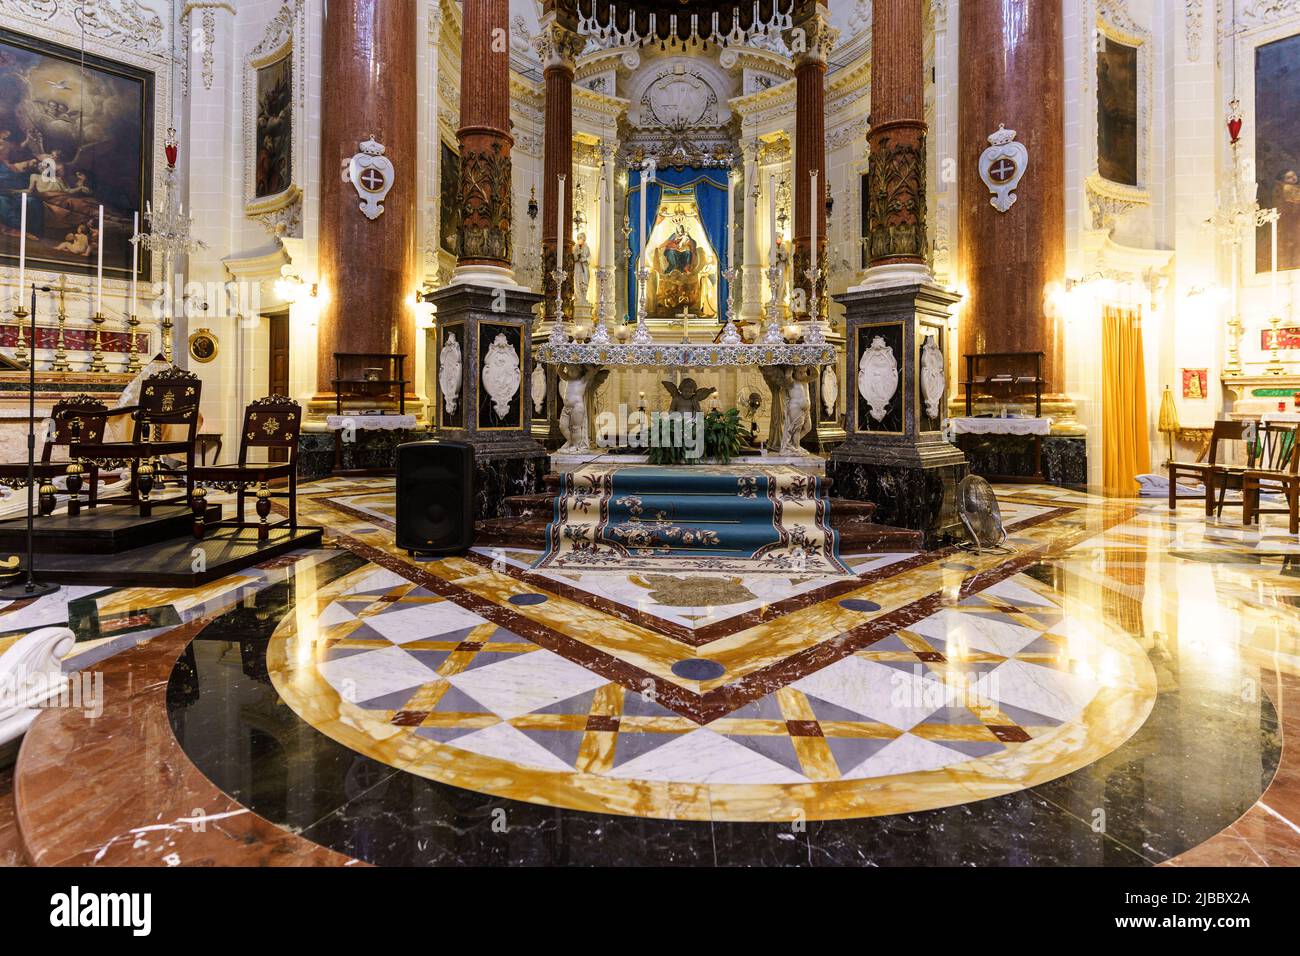 Valletta, Malta - November 27 2021: Interior view of the famous Basilica of Our Lady of Mount Carmel in Valletta medieval old town that dates back to Stock Photo